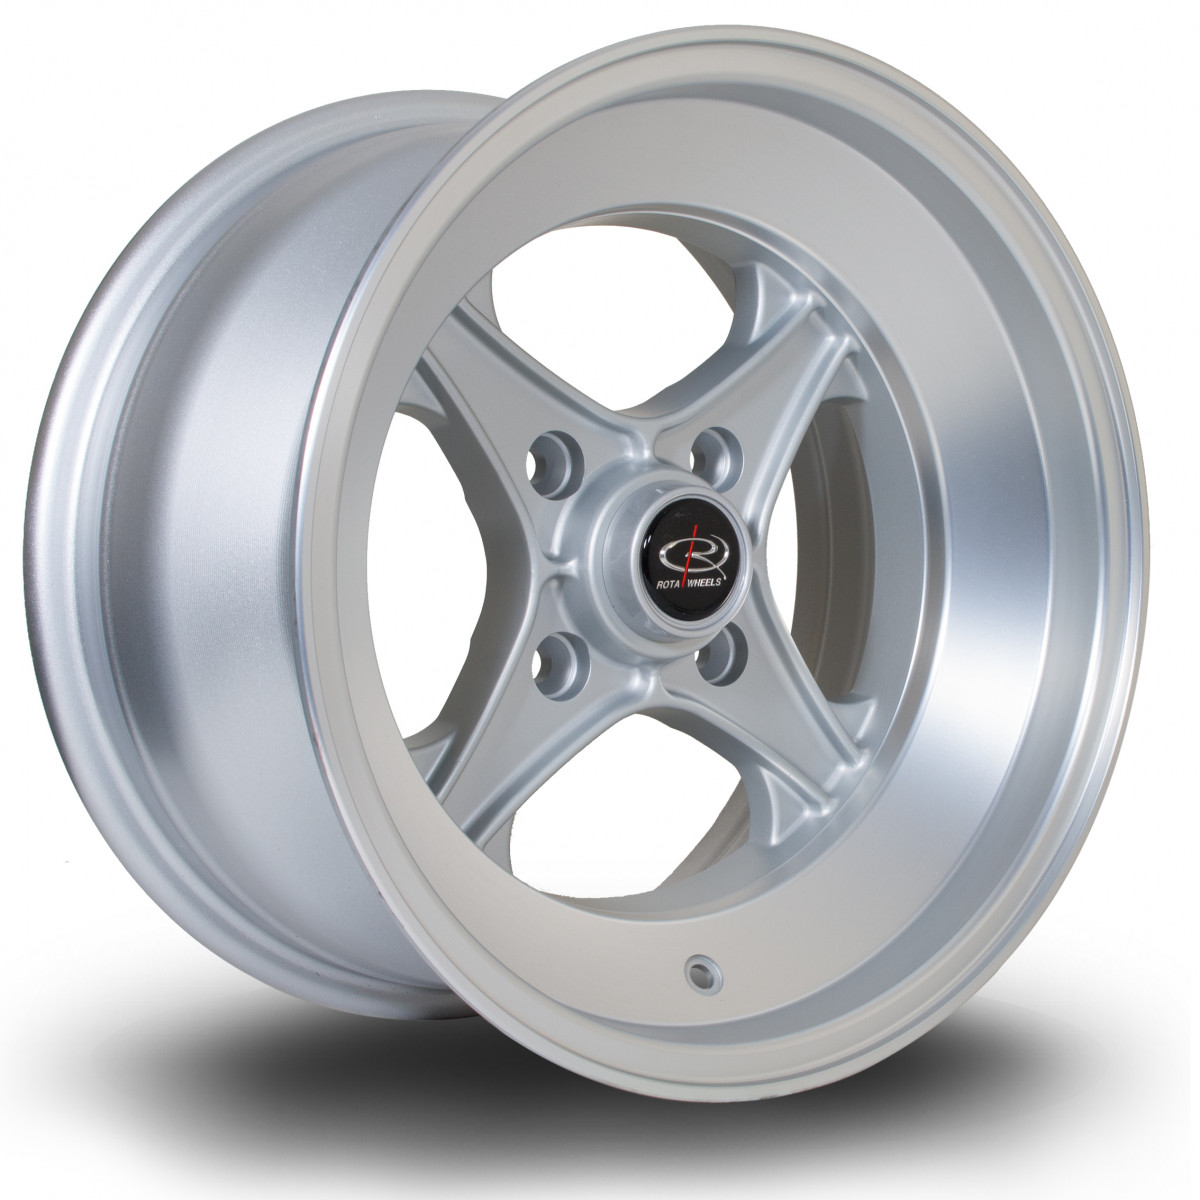 X04 15x8 4x100 ET0 Silver with Matte Polished Face